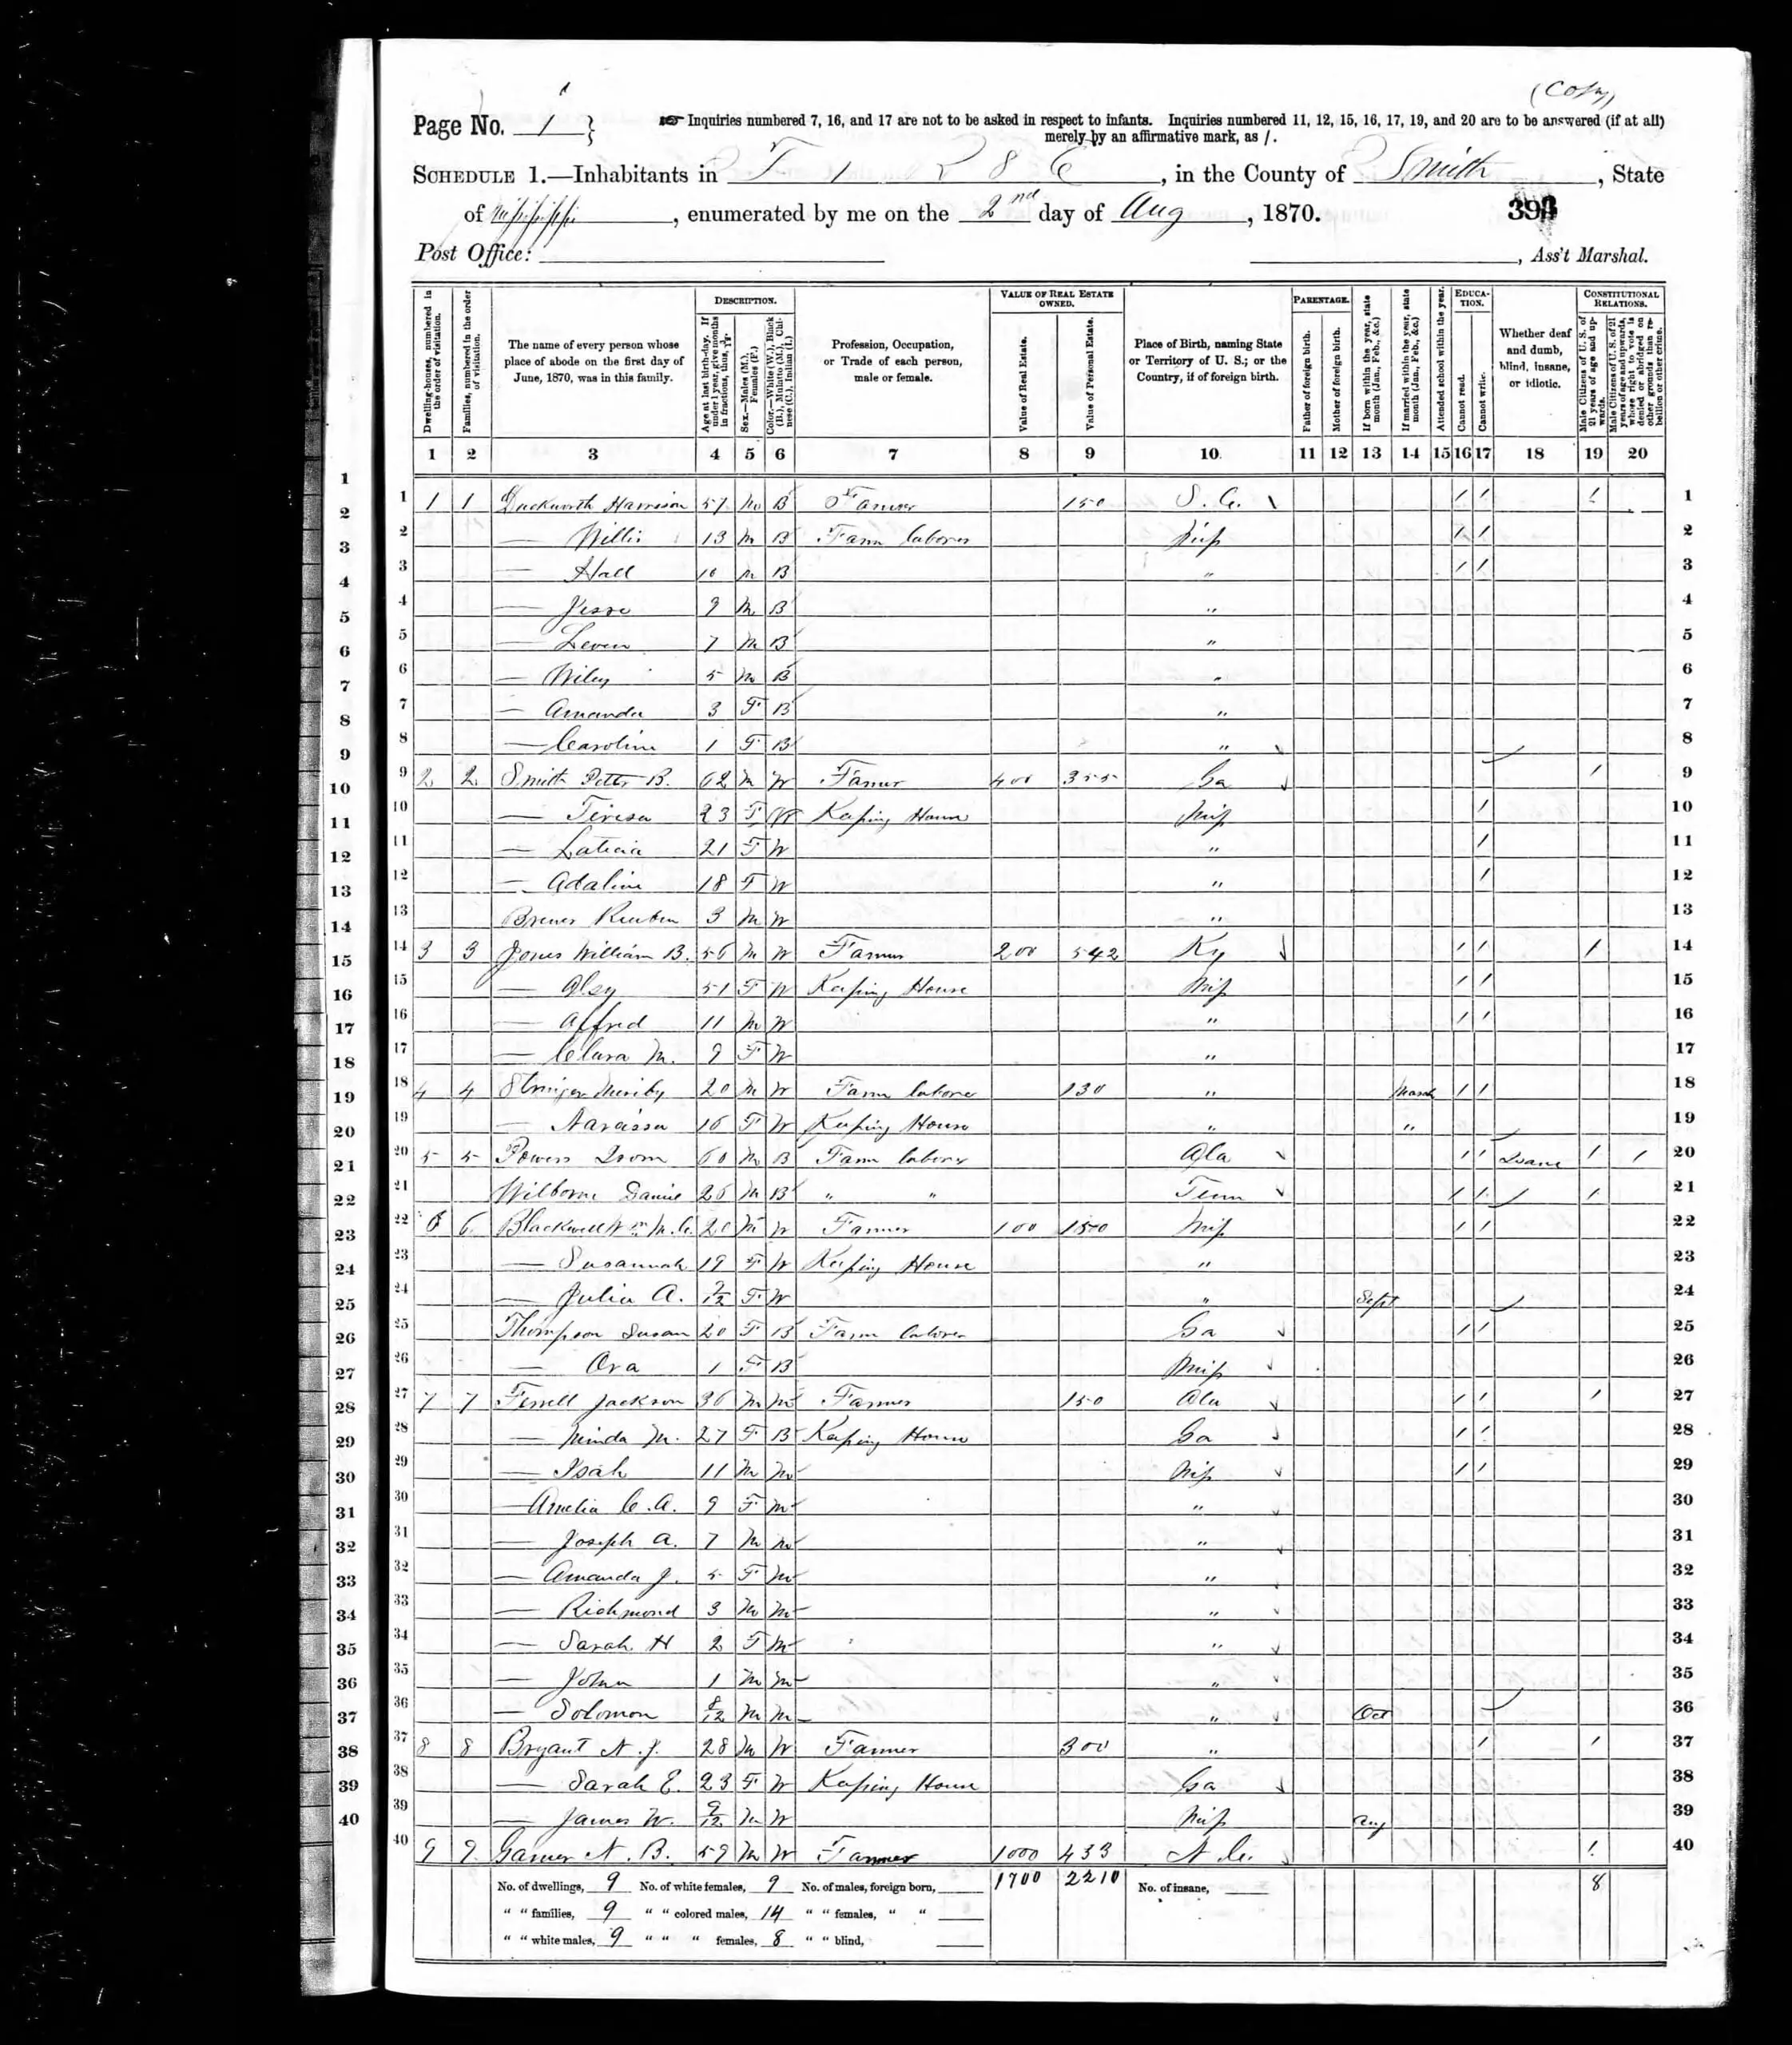 1870 census was used in my article the Life Story of Harrison Duckworth, My Great Great Grandfather.